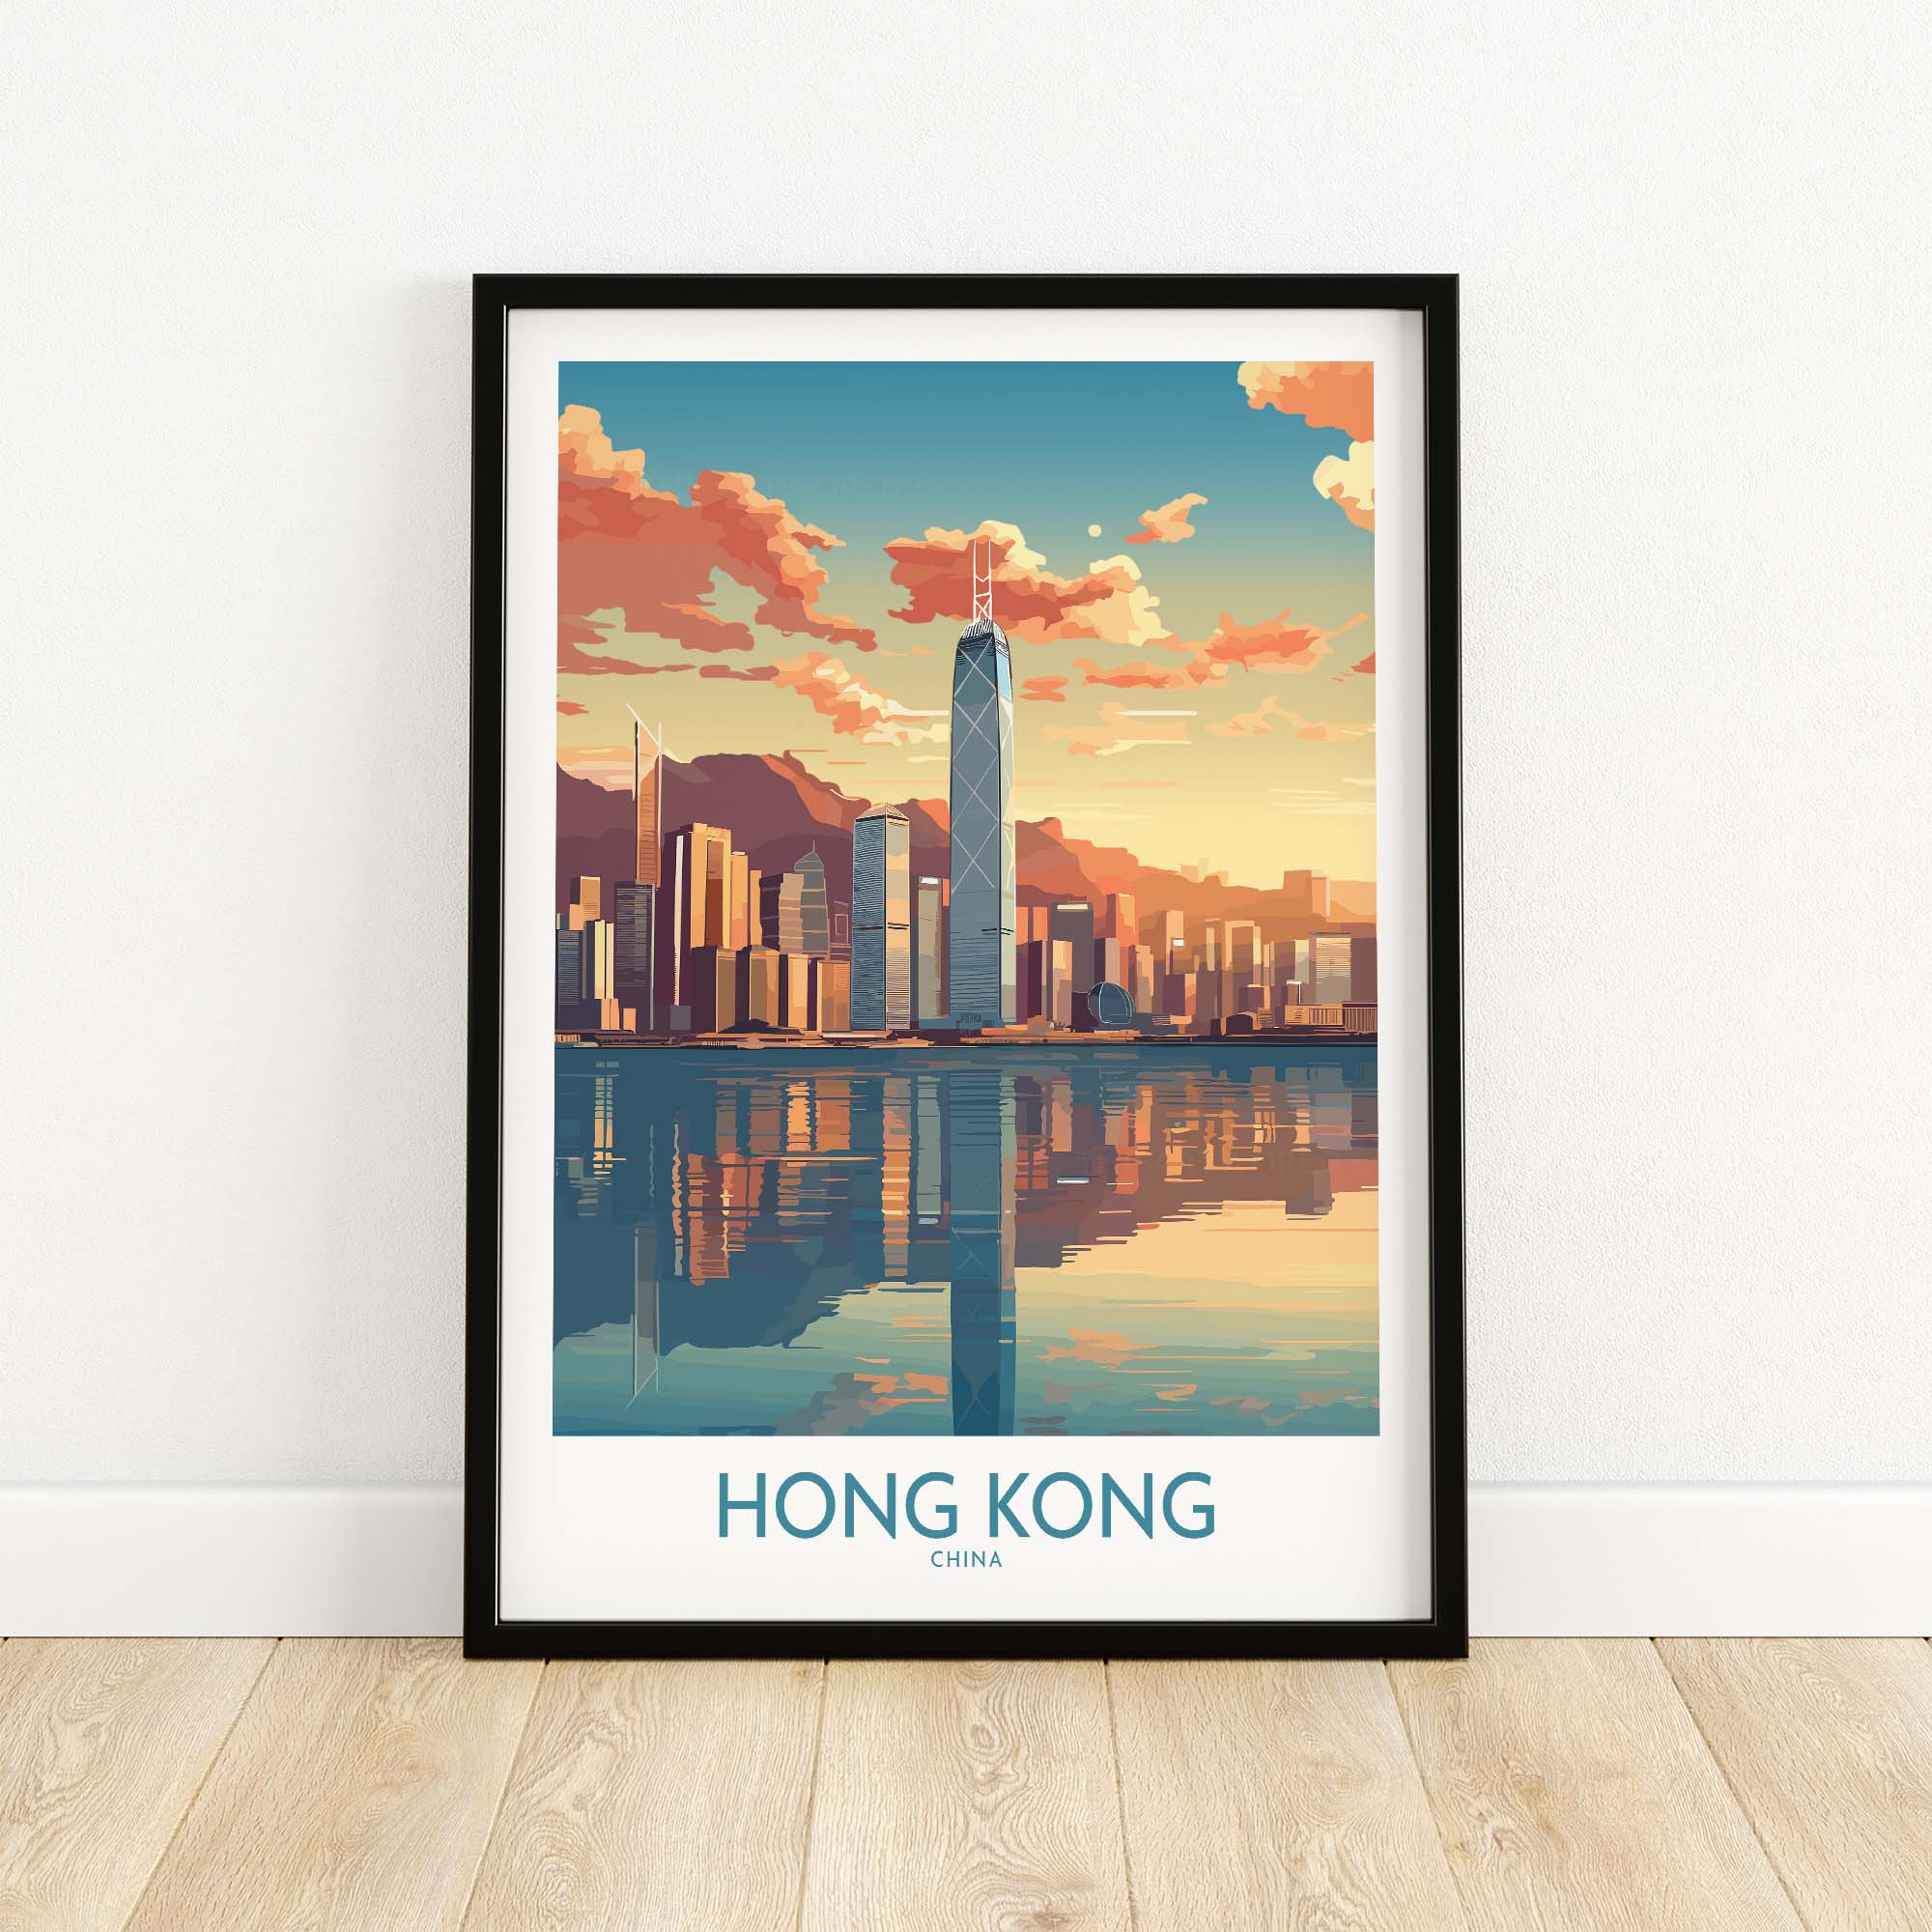 Hong Kong City Poster part of our best collection or travel posters and prints - This Art World